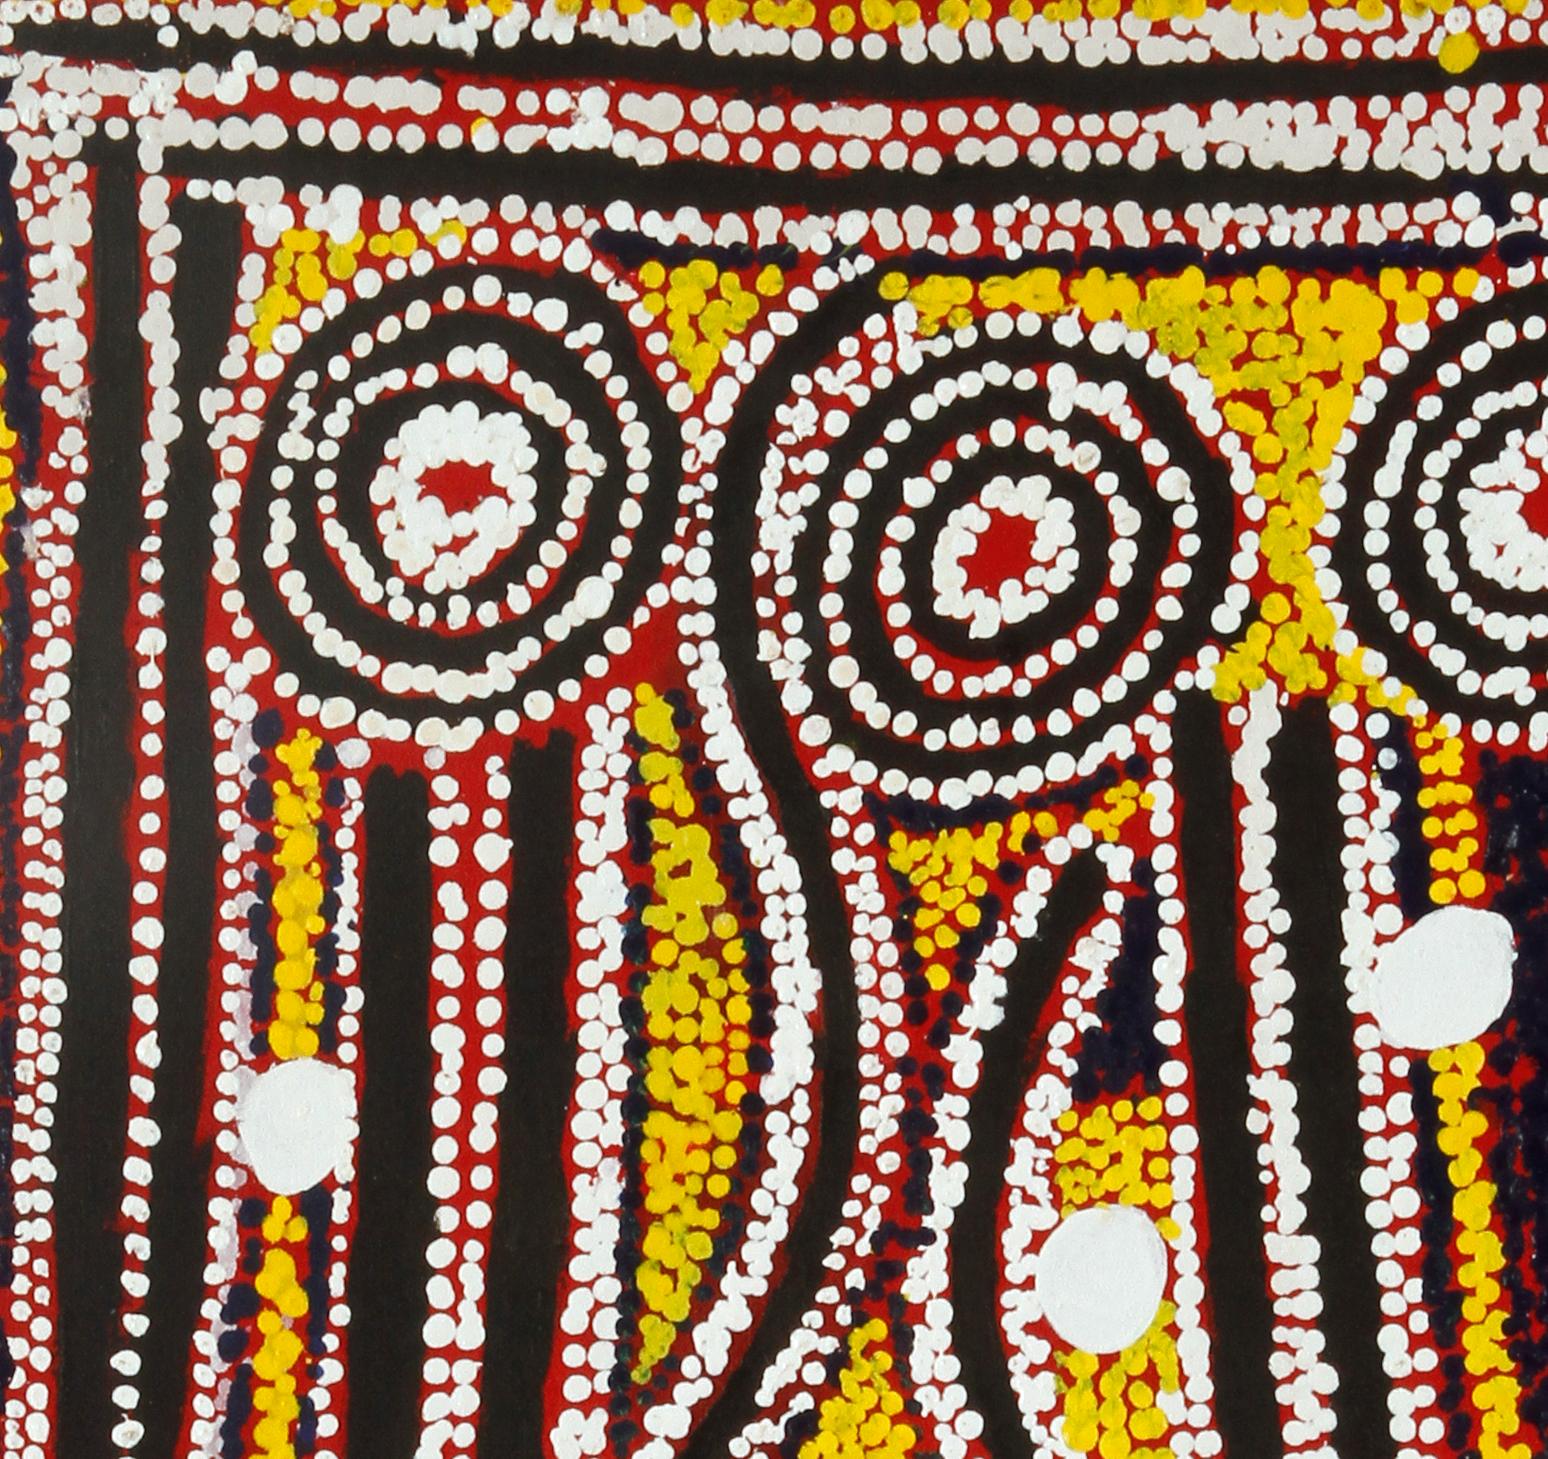 Fire Dreaming  - Painting by Paddy Sims Japaljarri